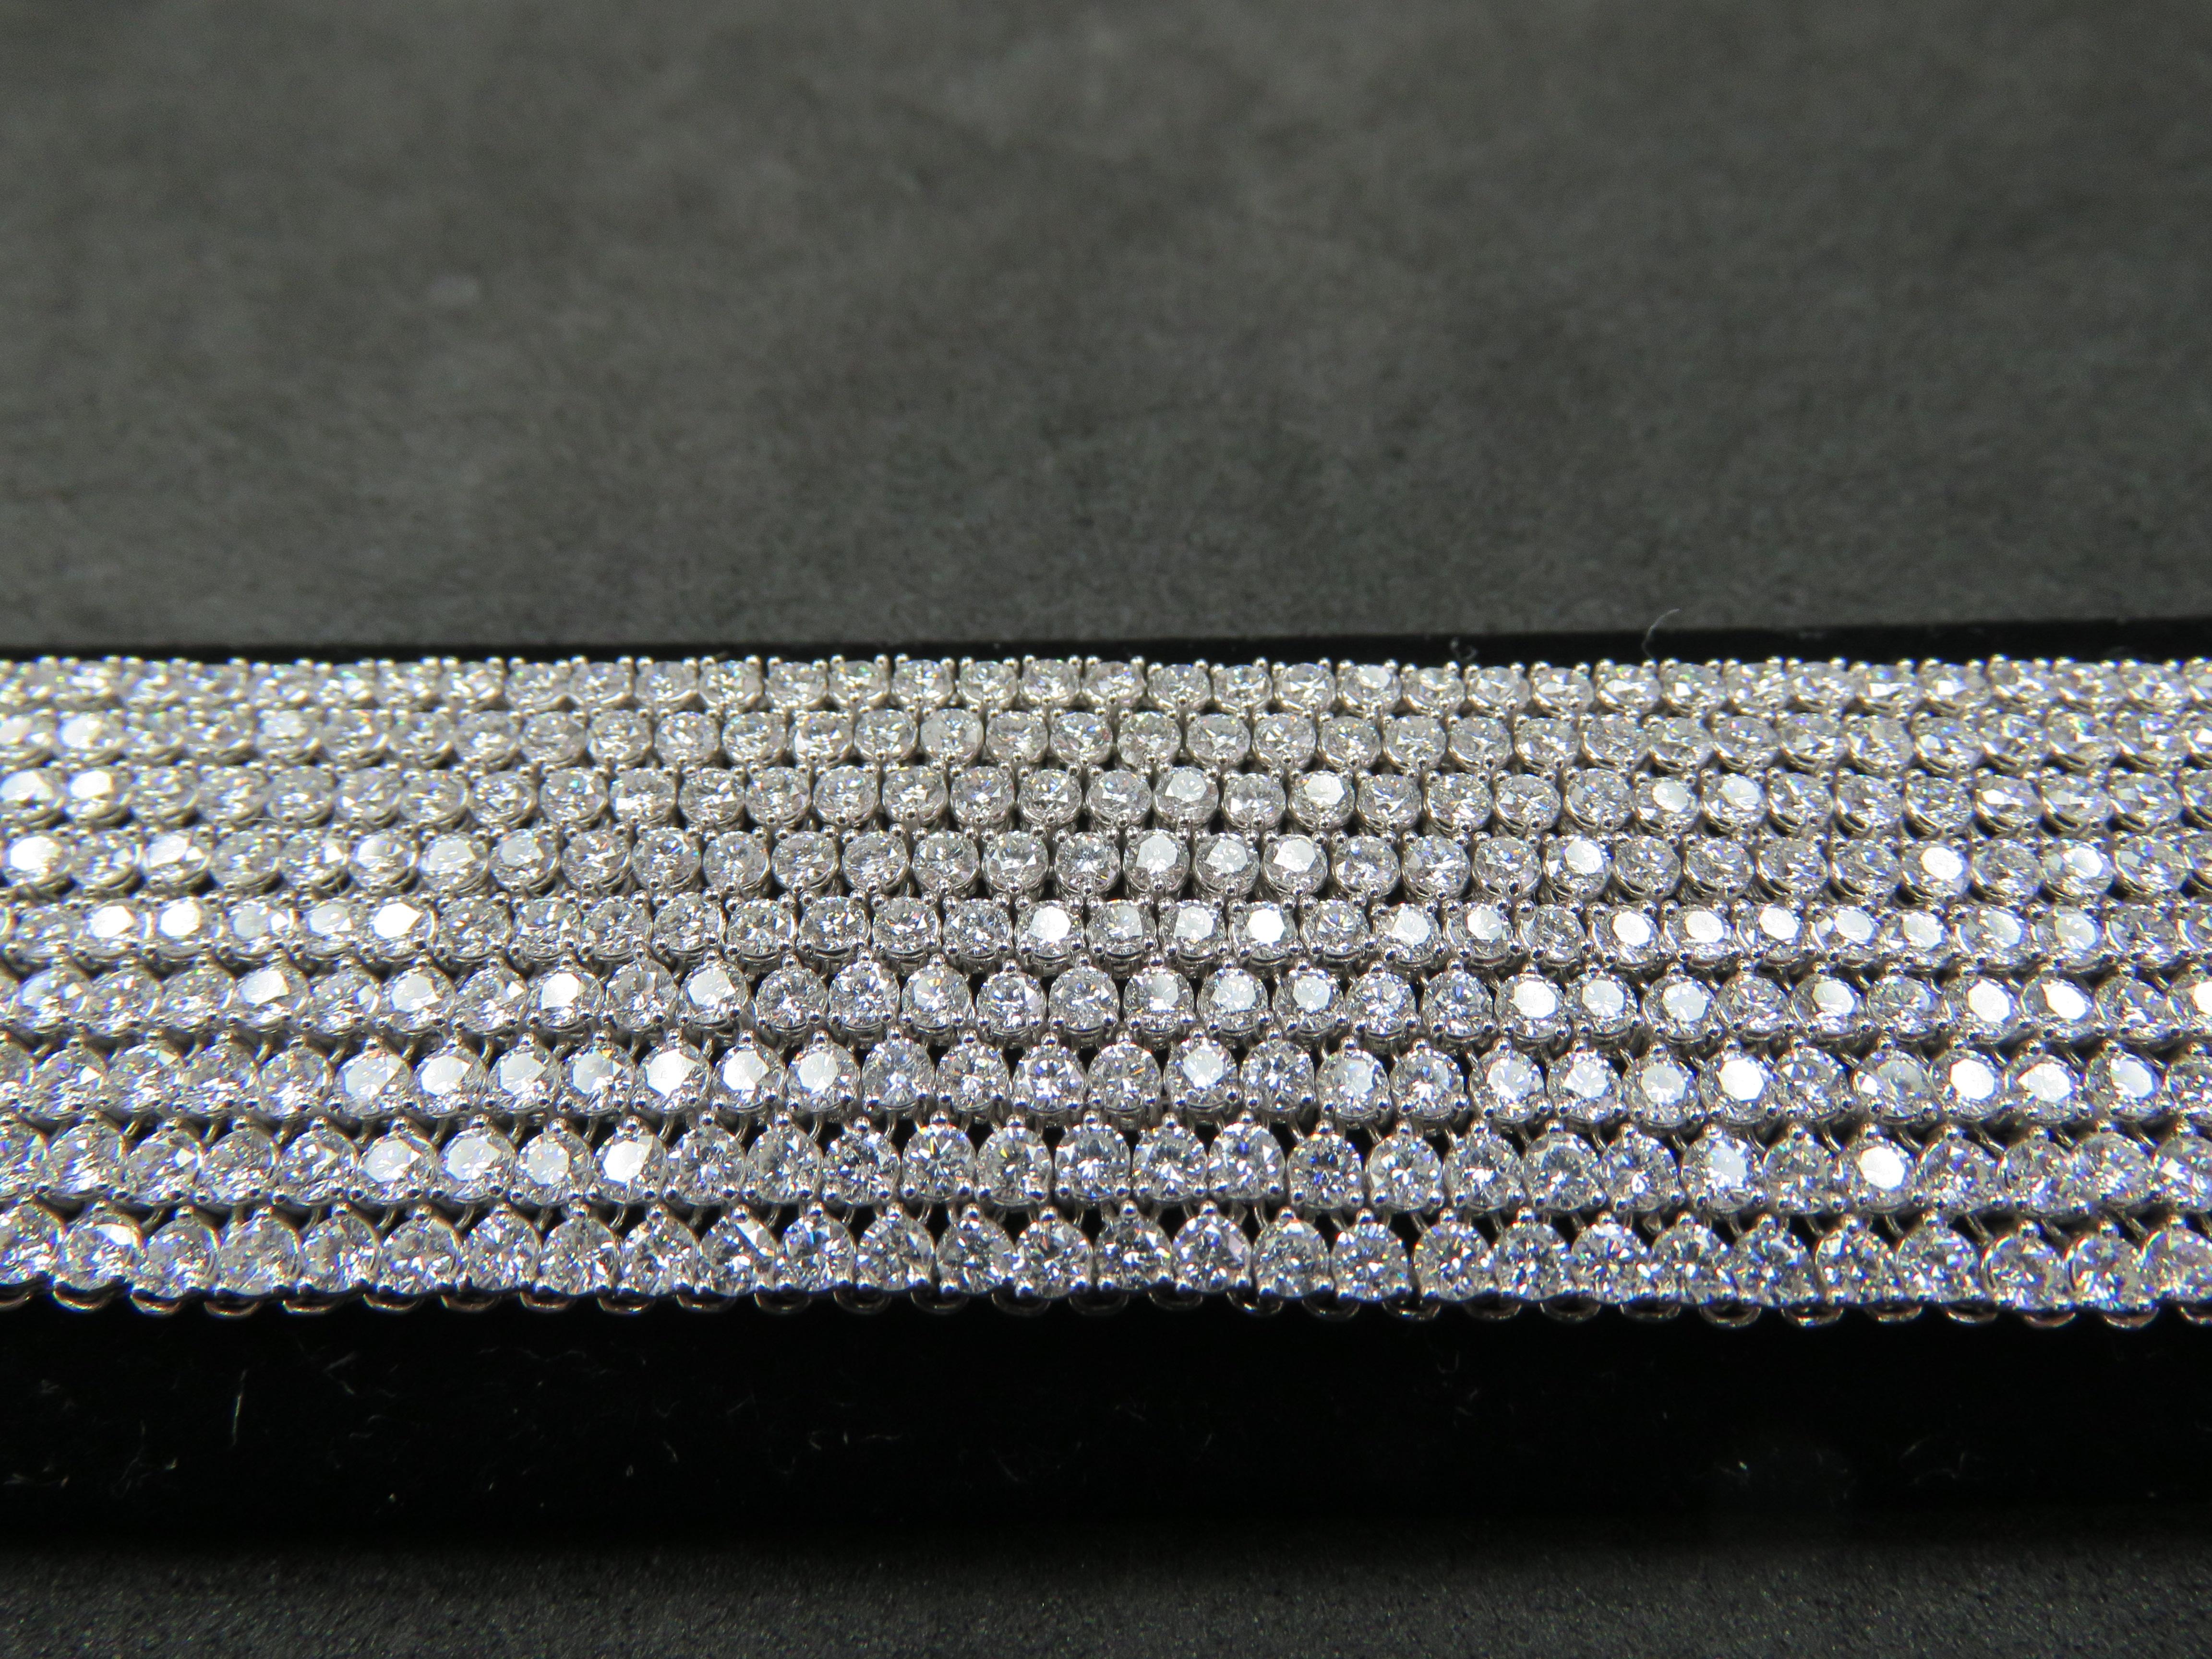 The Following Item we are offering is this Beautiful Rare Important 18KT White Gold Brilliant White Diamond Fancy Elaborate Multi Row Bracelet. Bracelet is comprised of approx 28CTS of Magnificent Rare Gorgeous Rare Fancy Glittering Diamonds!!! The